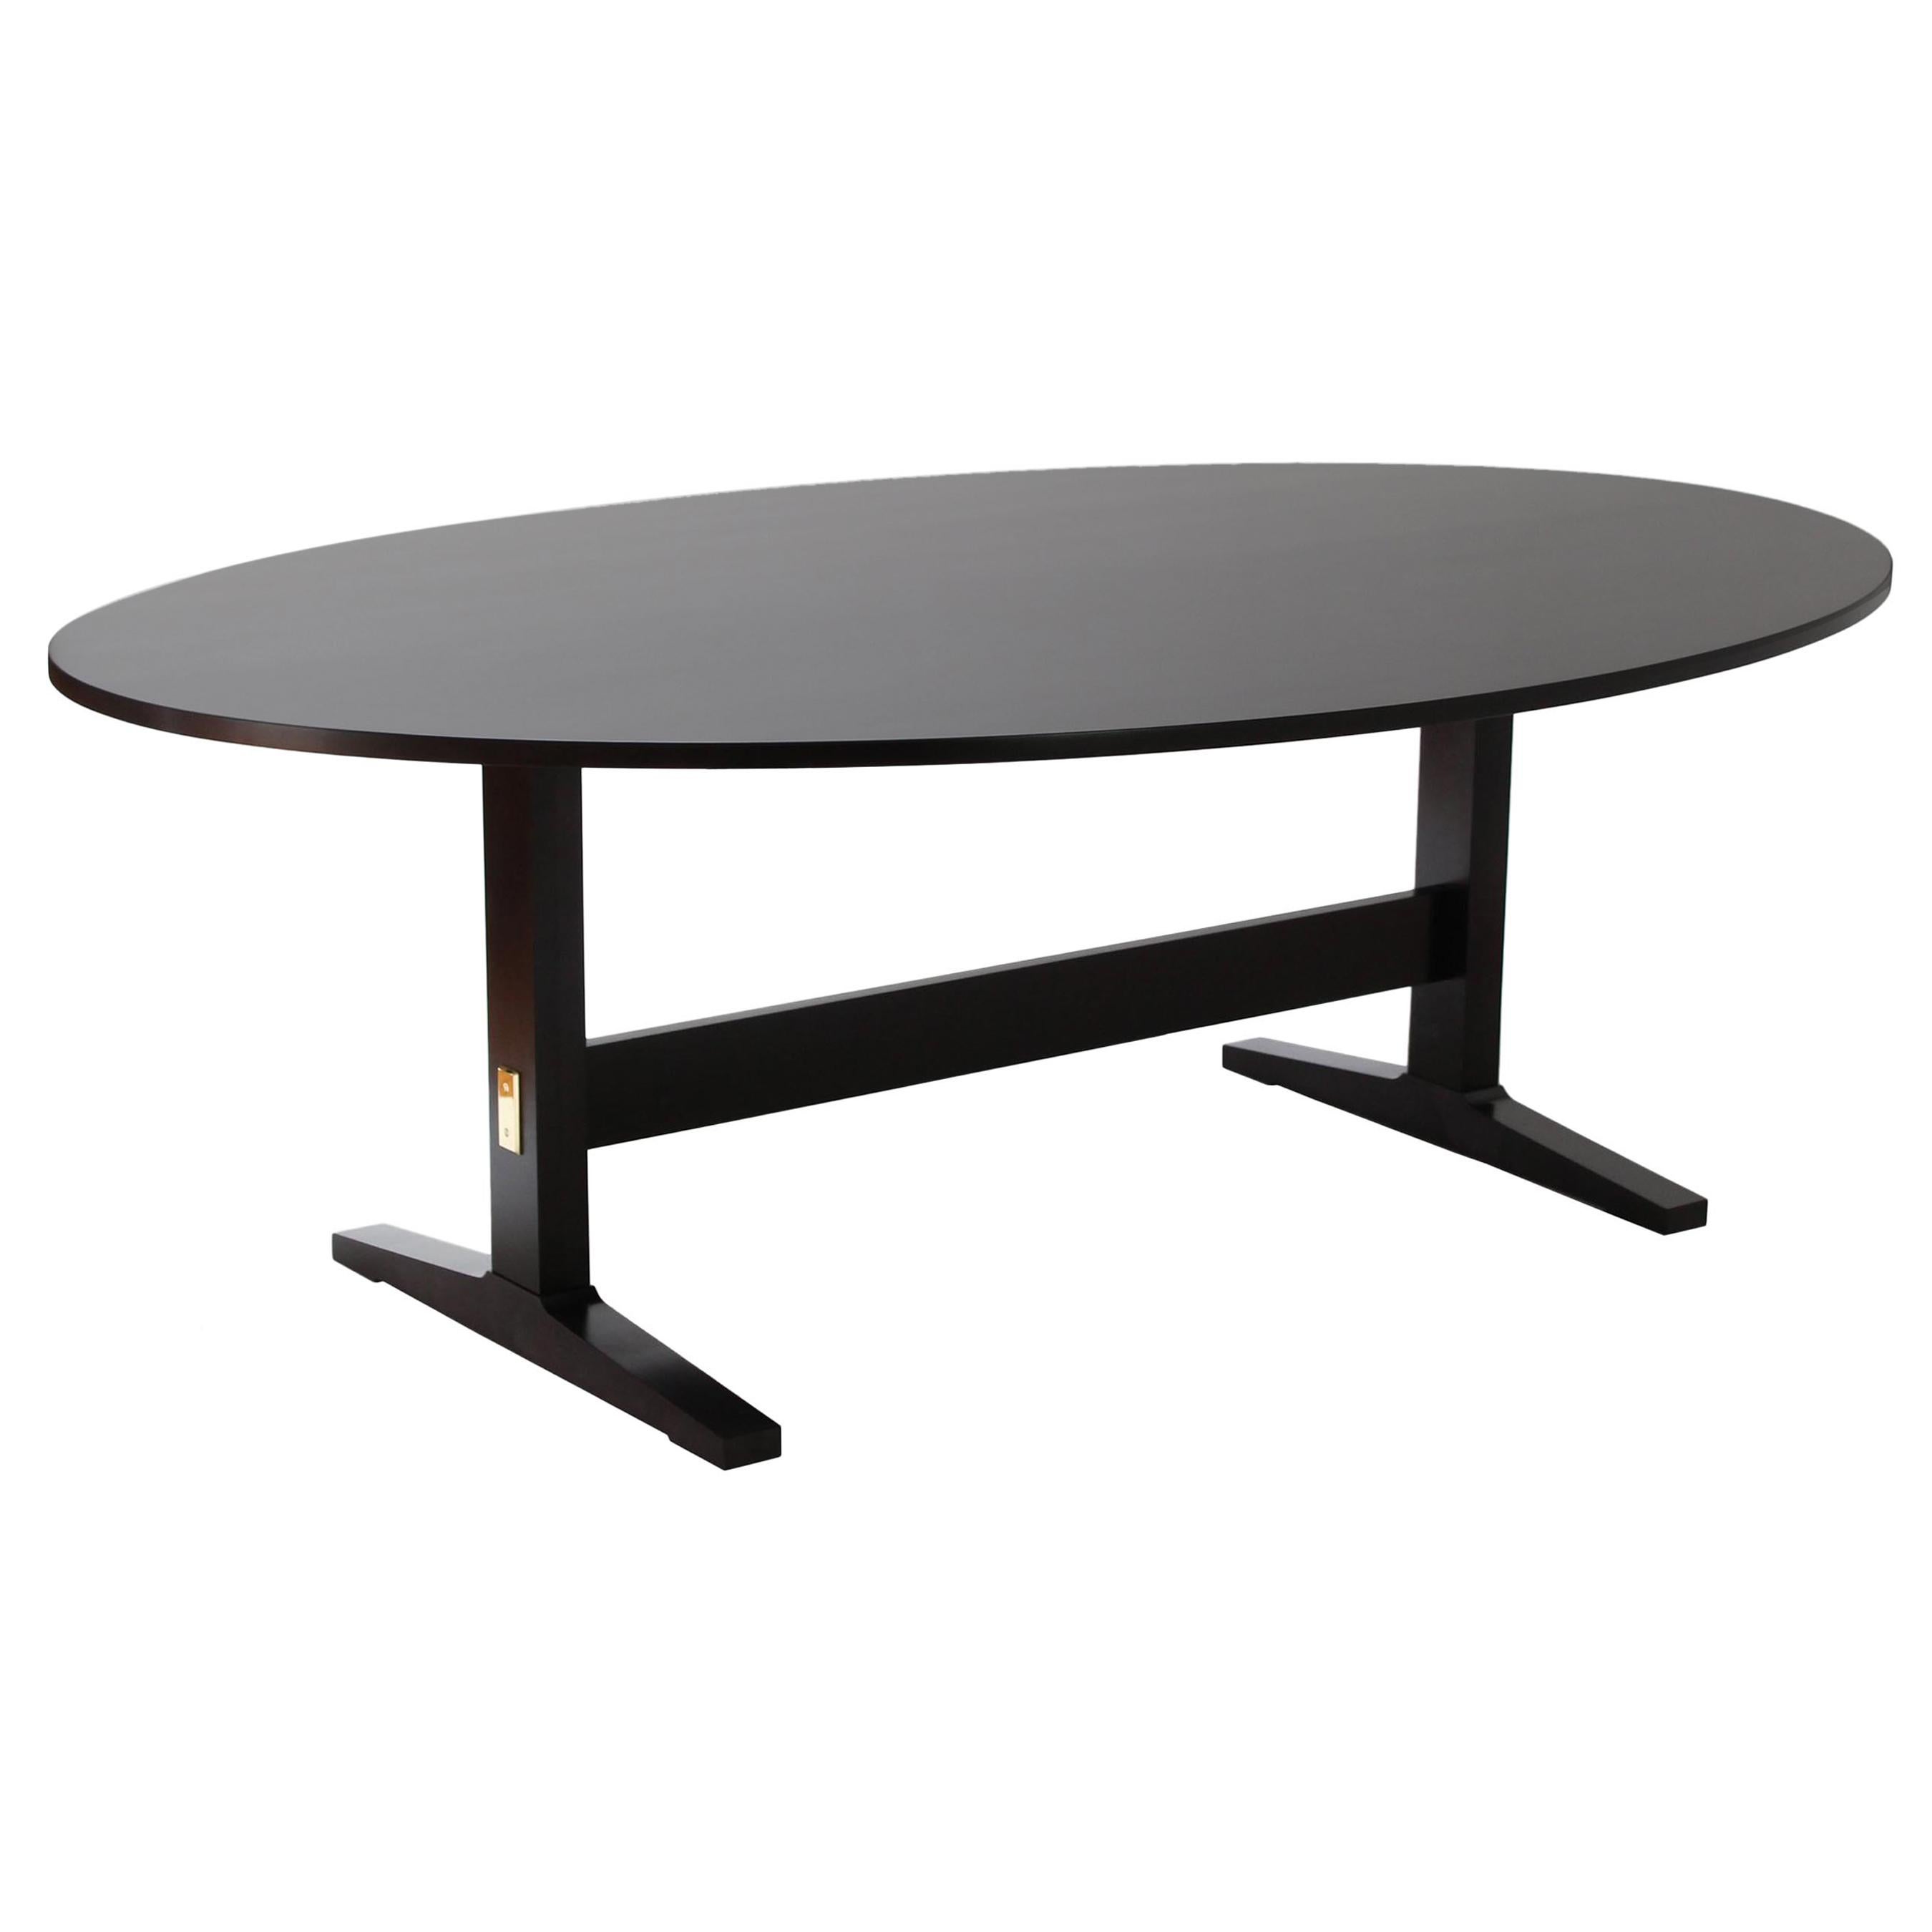 Oval Acre Trestle Table, Contemporary Oval Table in Ebony Stain on Maple Wood For Sale